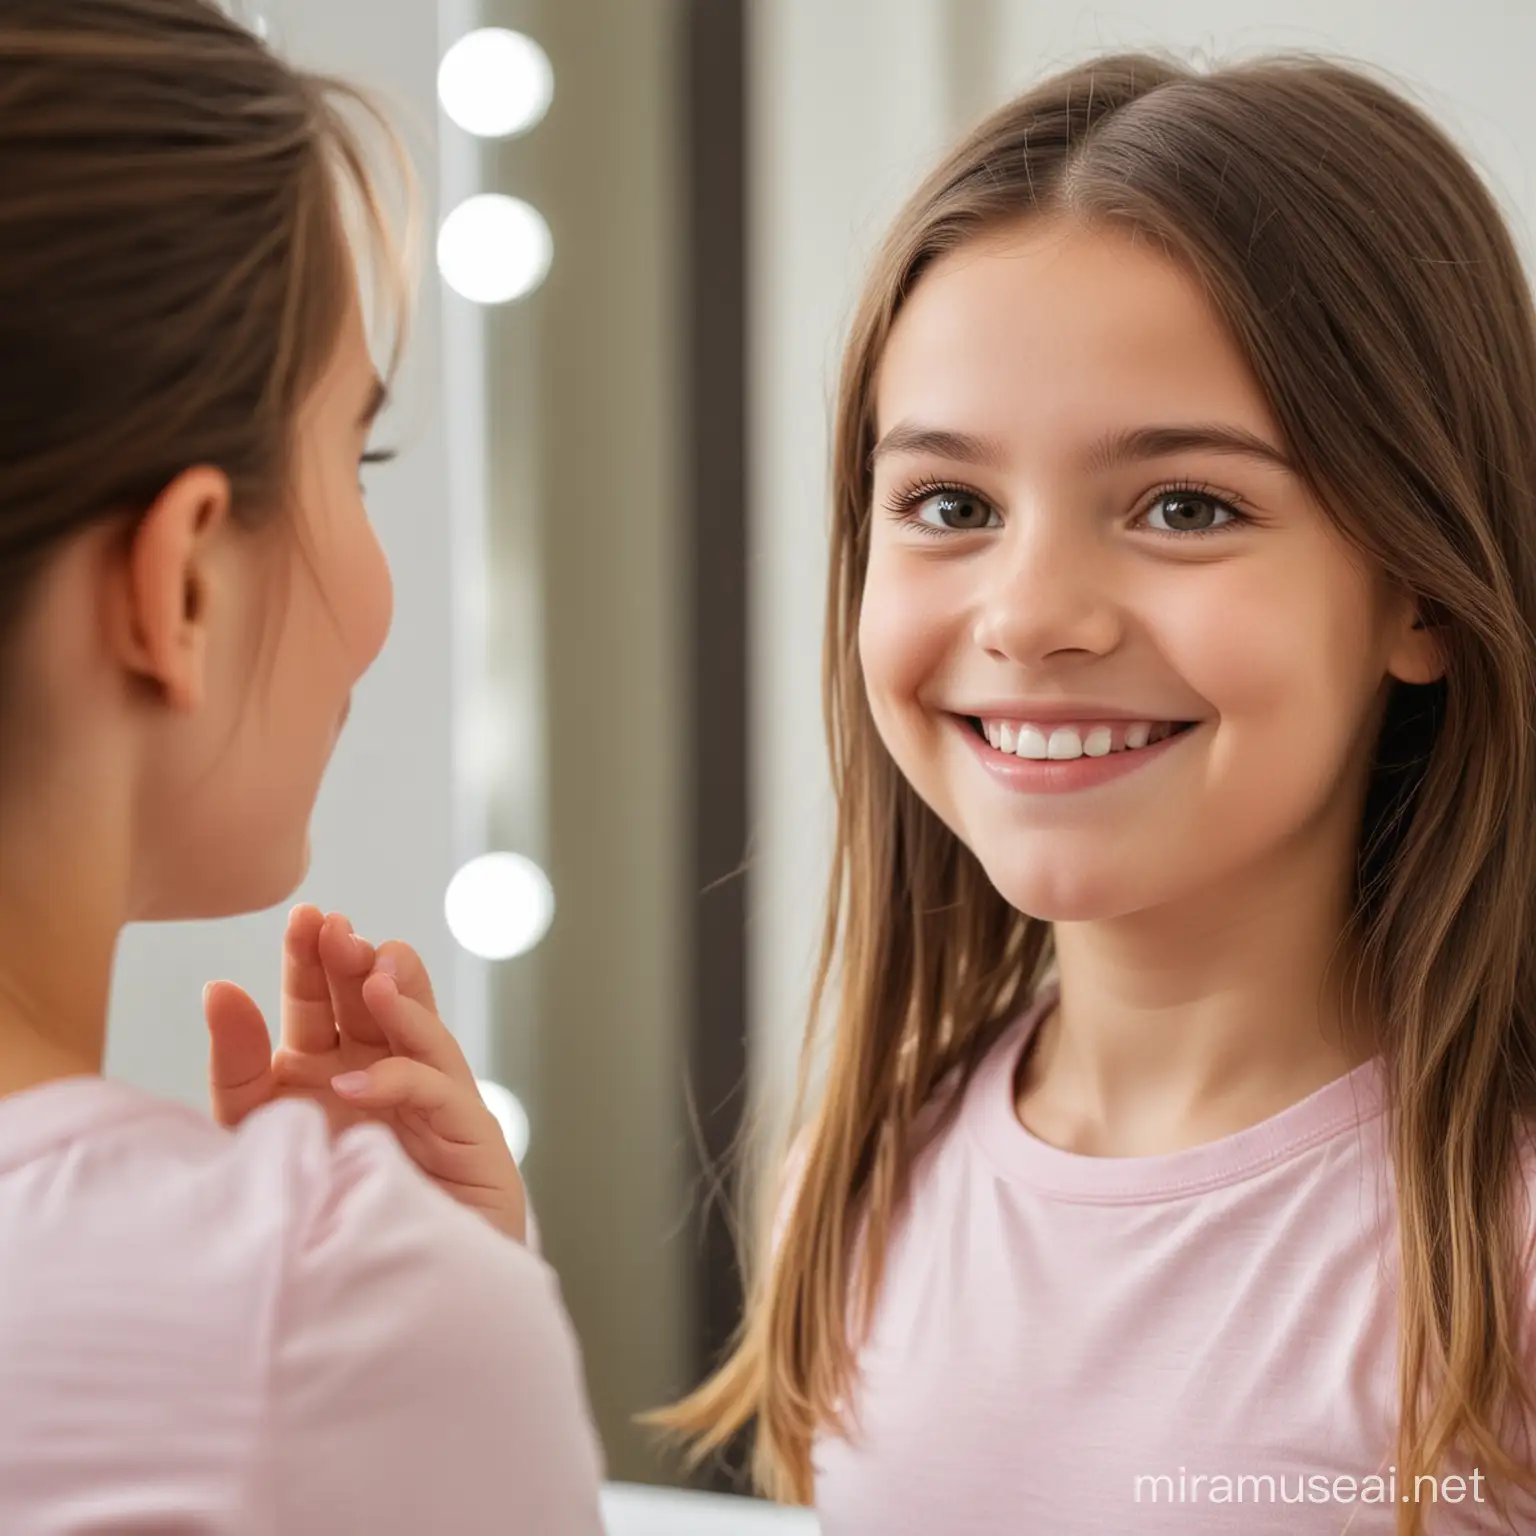 A young girl looking at herself in the mirror smiling at how bright her future will be